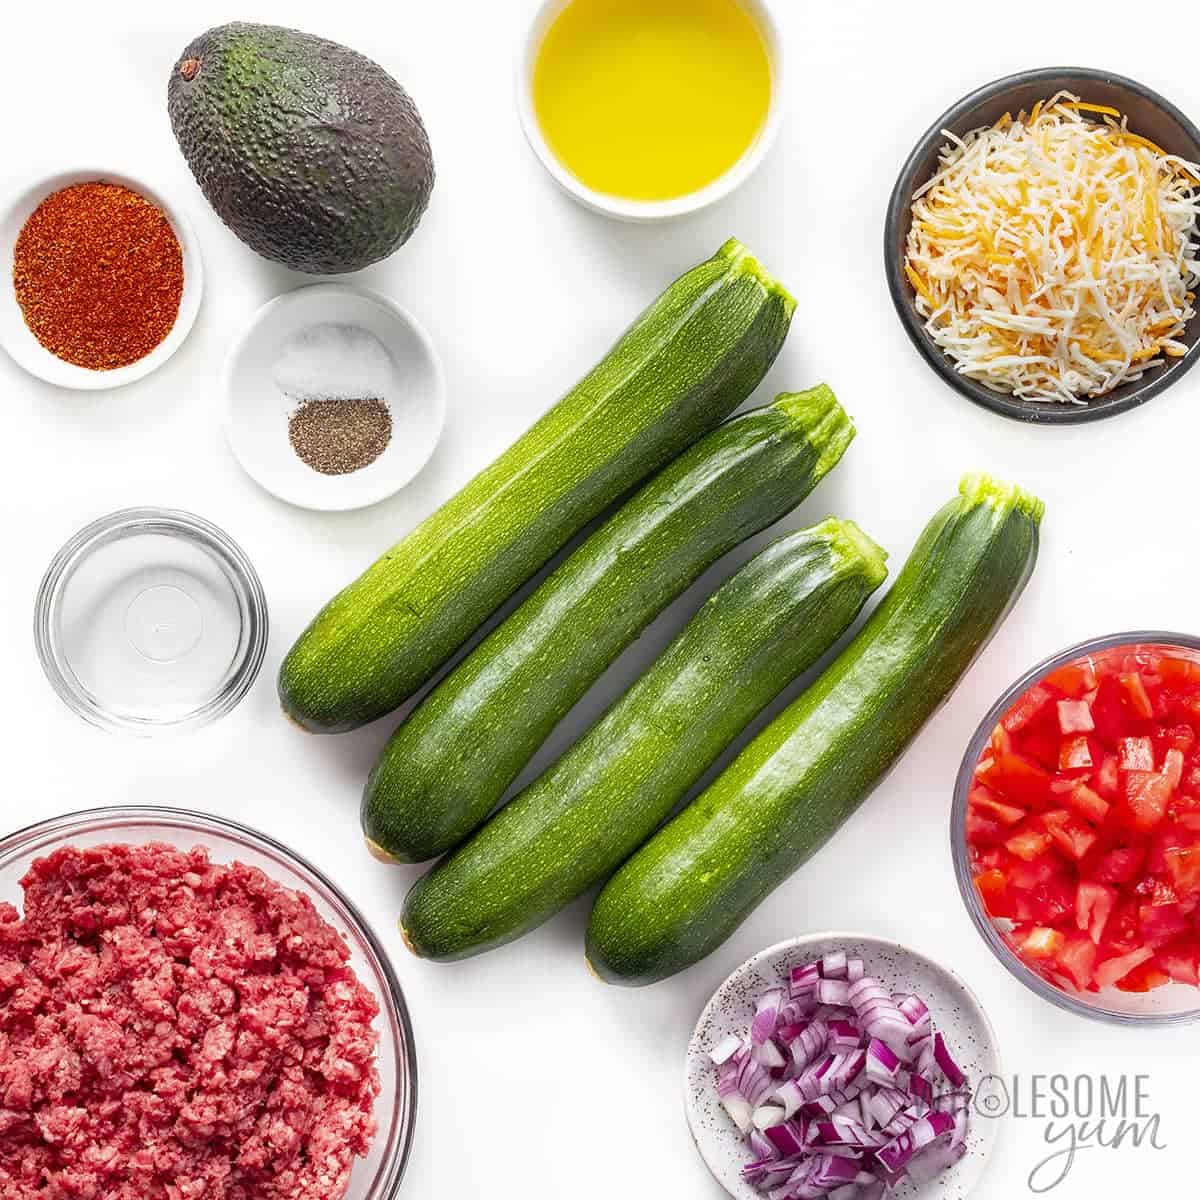 Ingredients to make taco zucchini boats